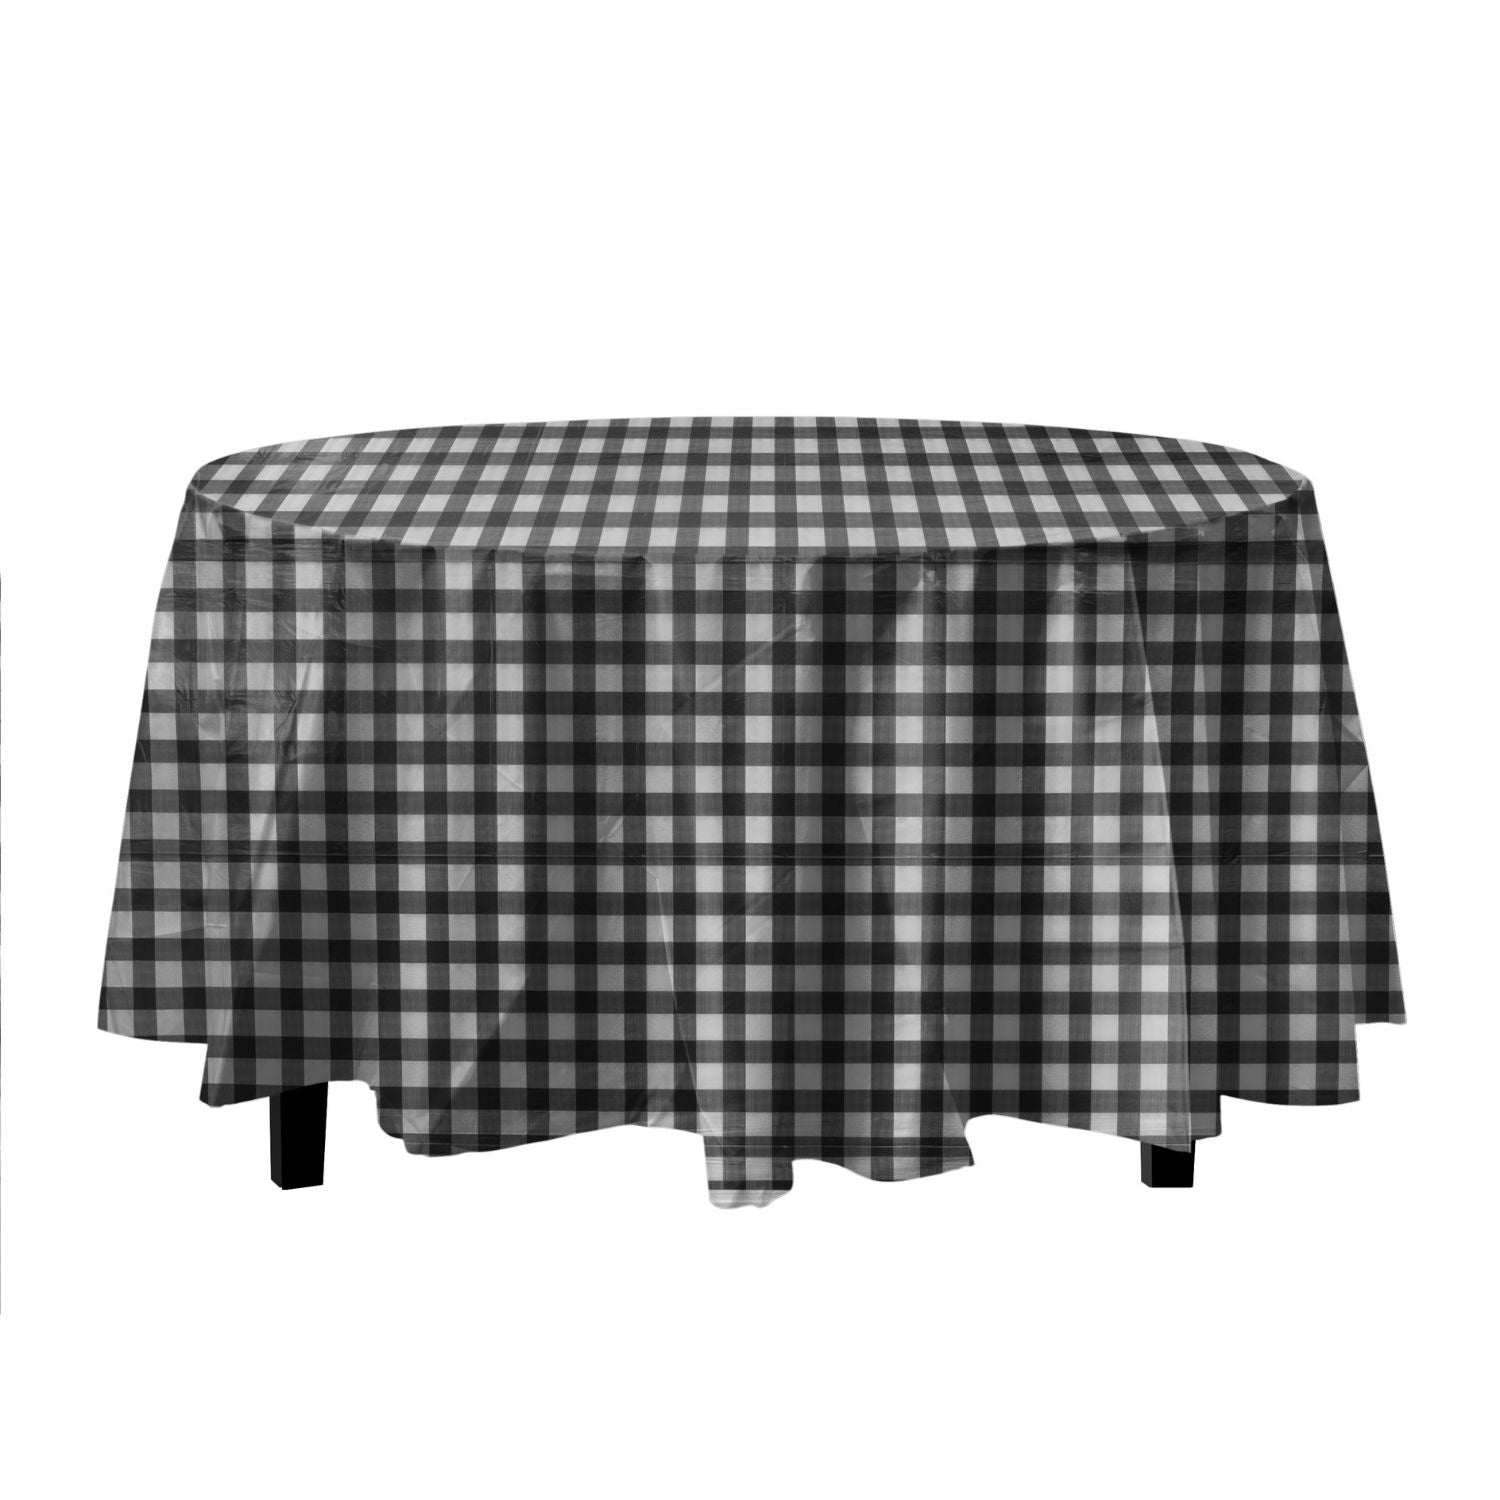 Black Gingham Printed Plastic Round Tablecloth | 48 Count